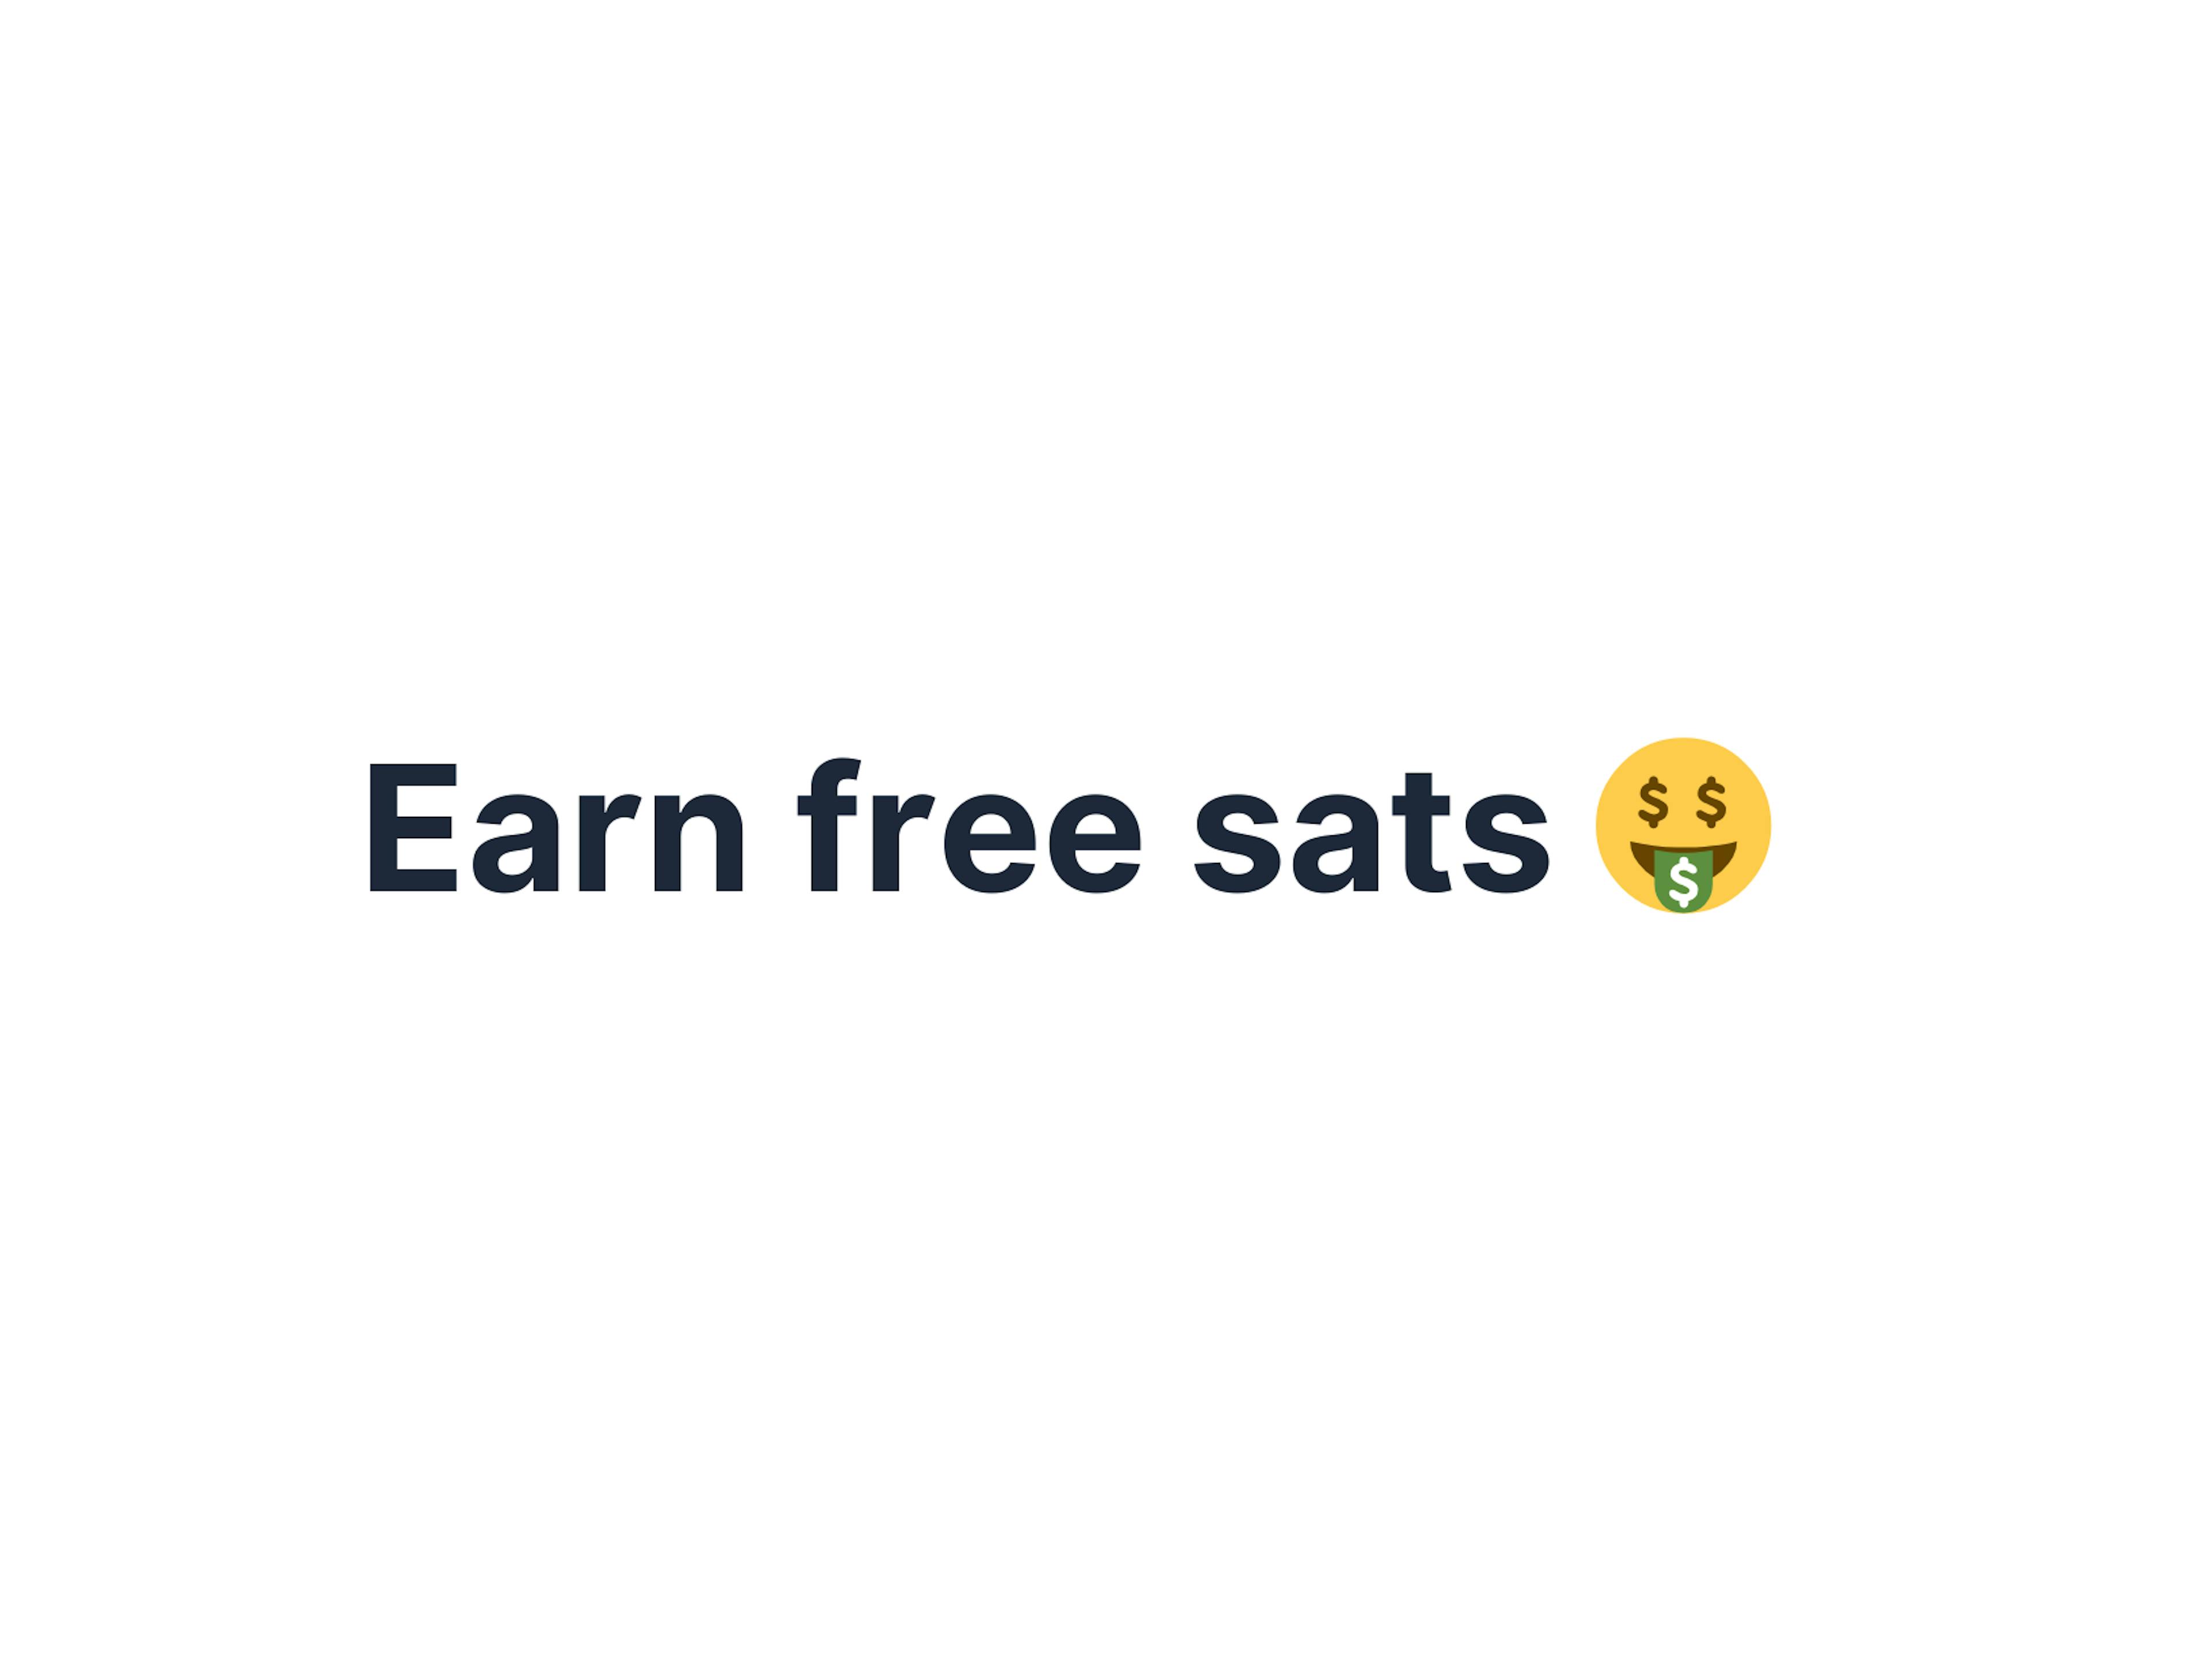 How to earn free Sats?